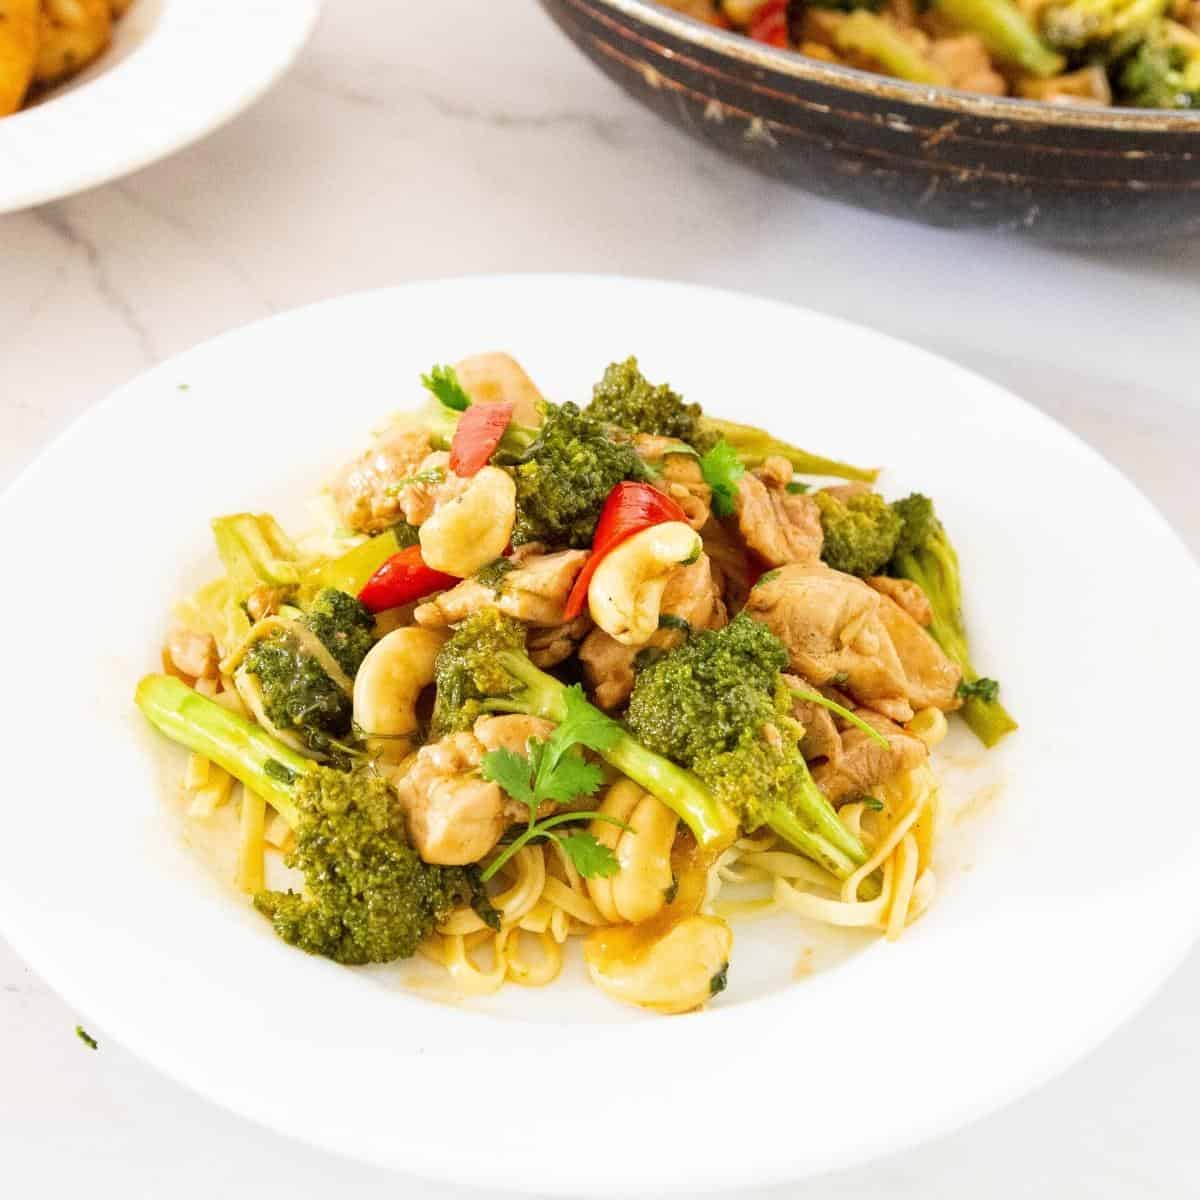 Chicken stir fry with broccoli over boiled noodles.